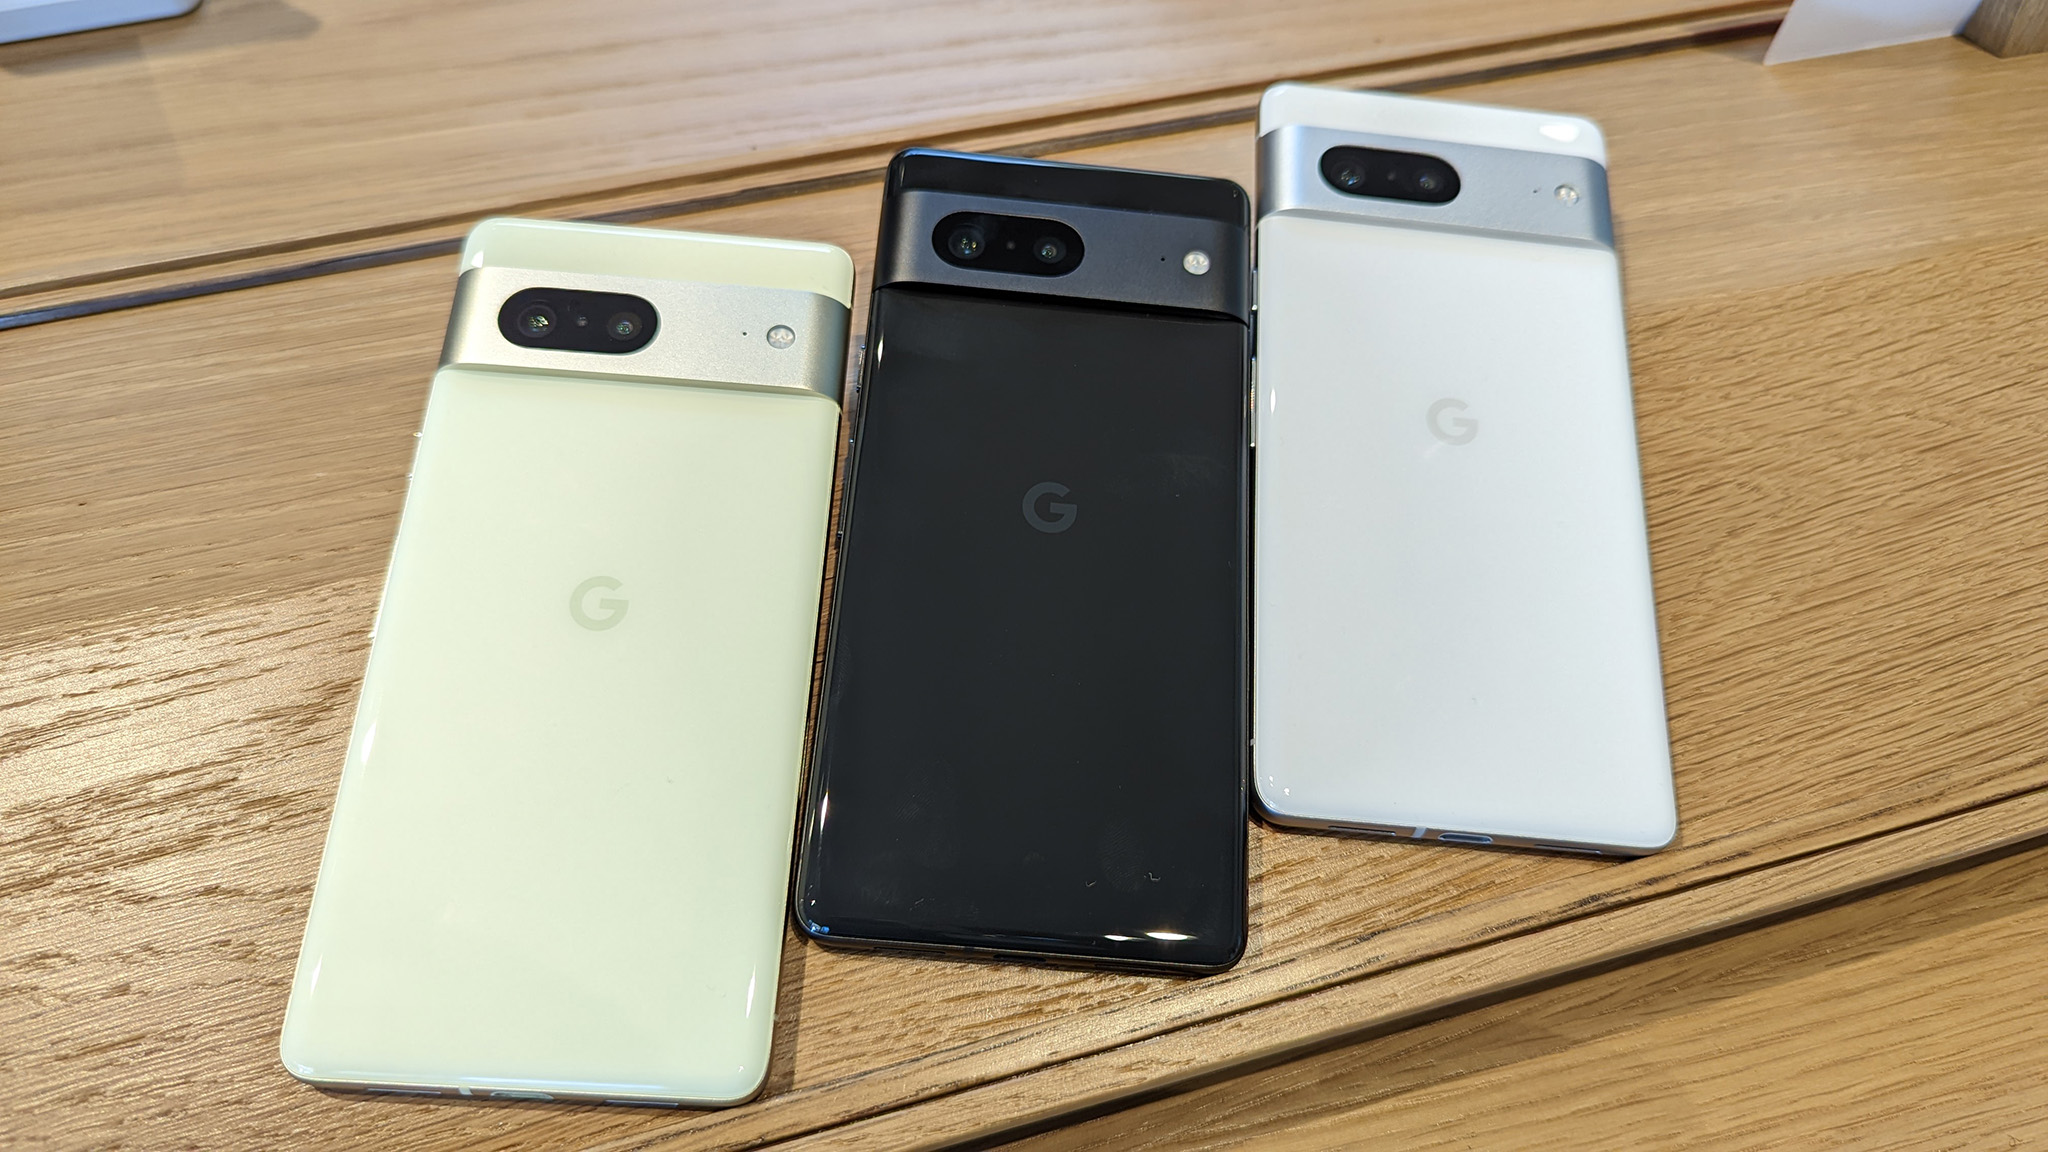 Taking a look at the Google Pixel 7 at Google's Fall 2022 event